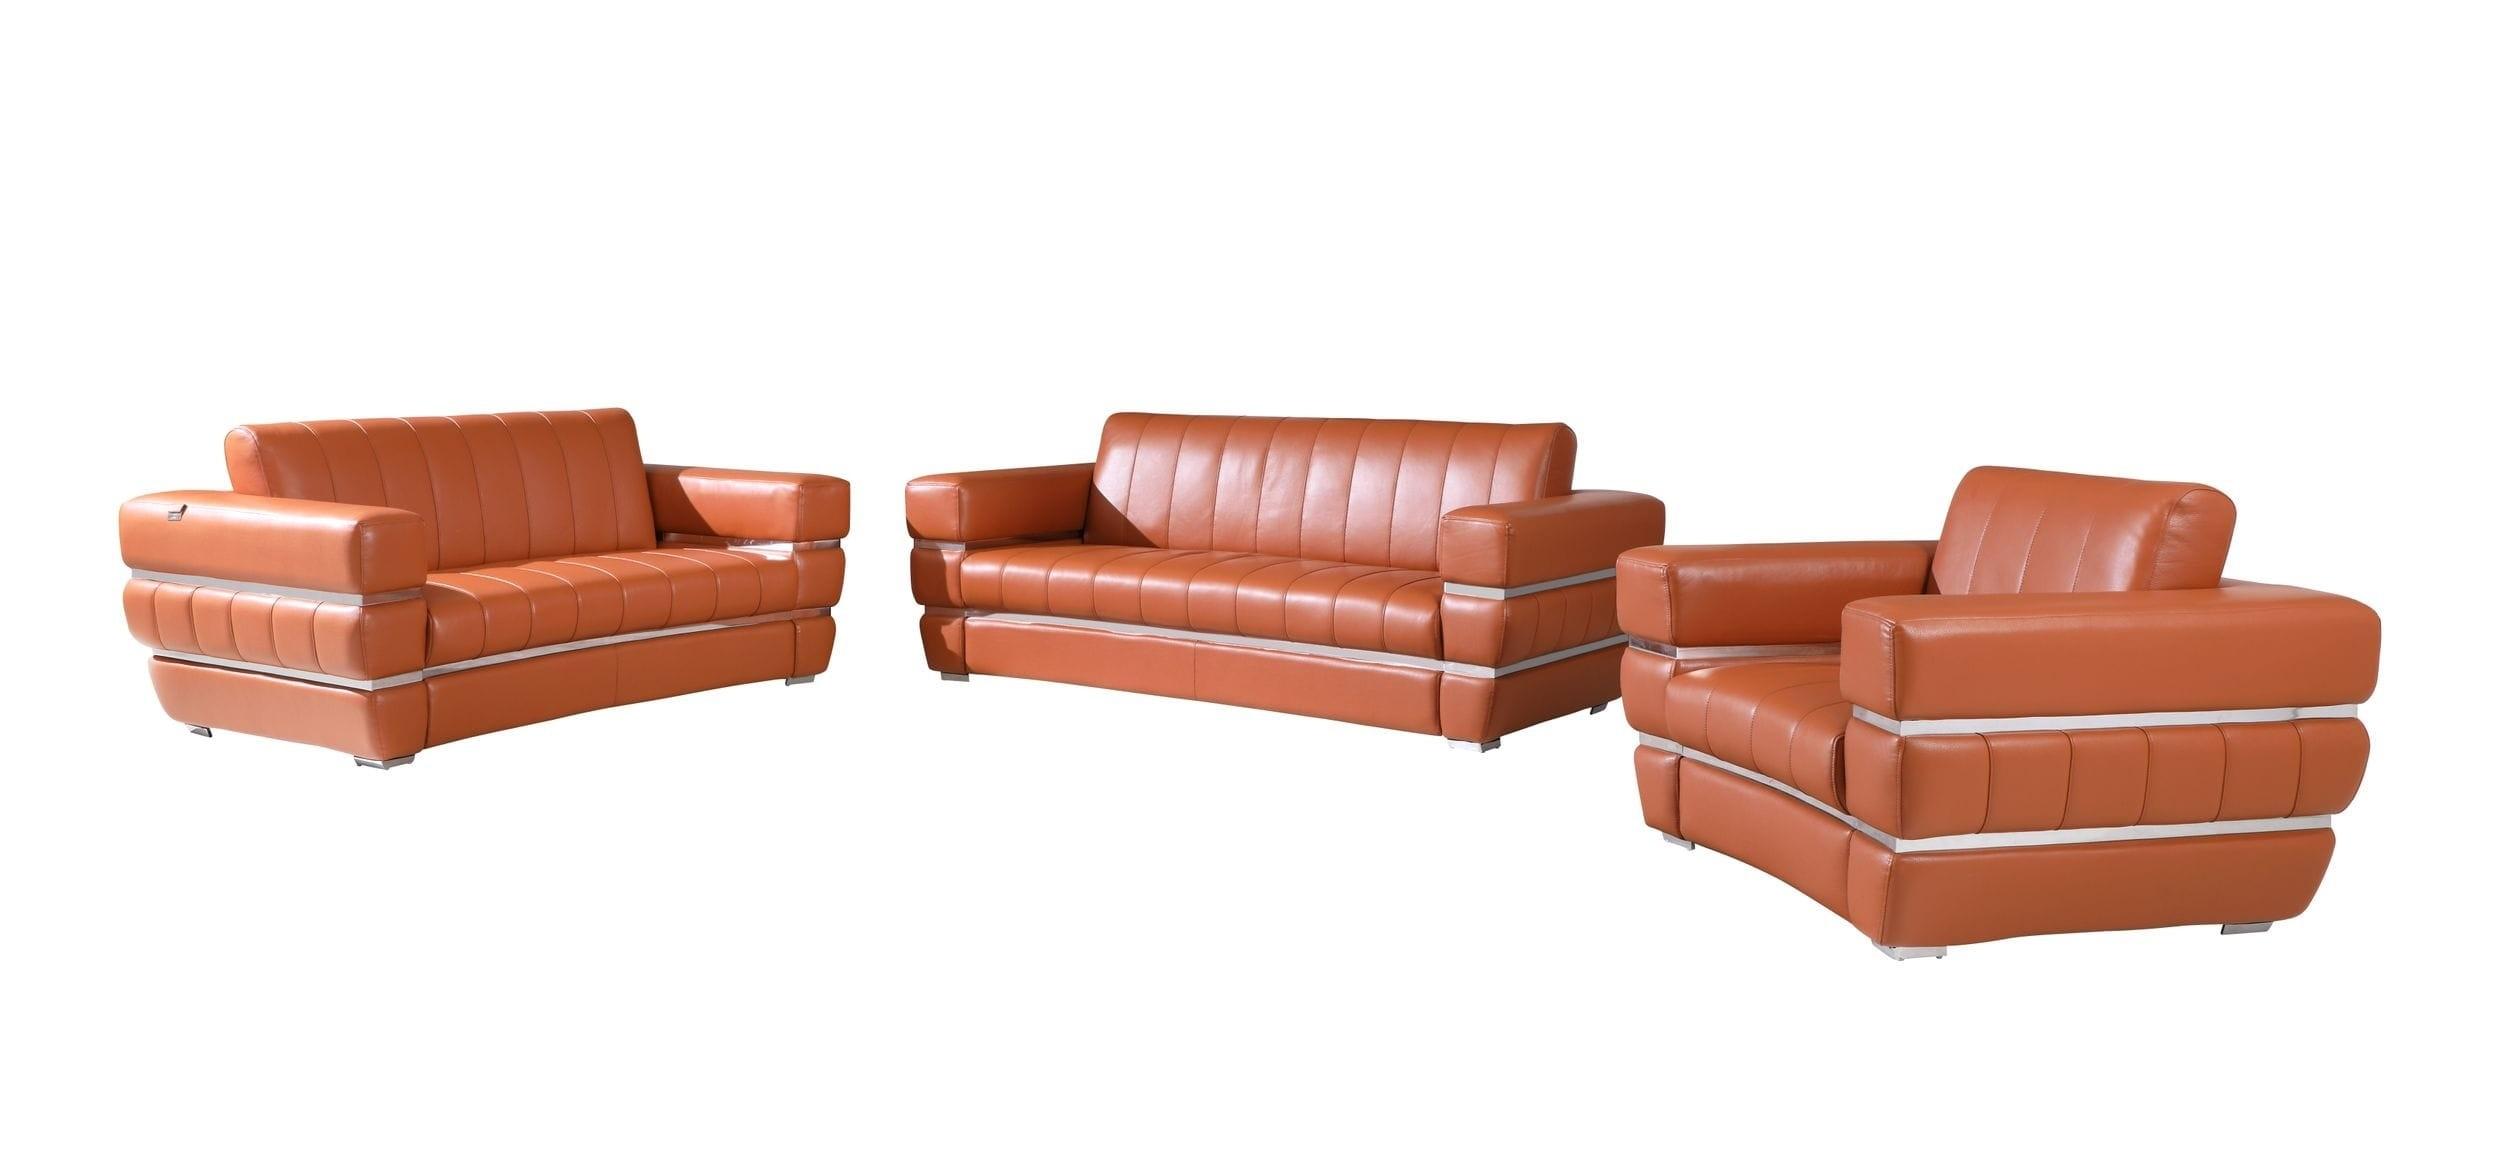 Contemporary Sofa Loveseat and Chair Set 904 904-CAMEL-3-PC in Camel Leather